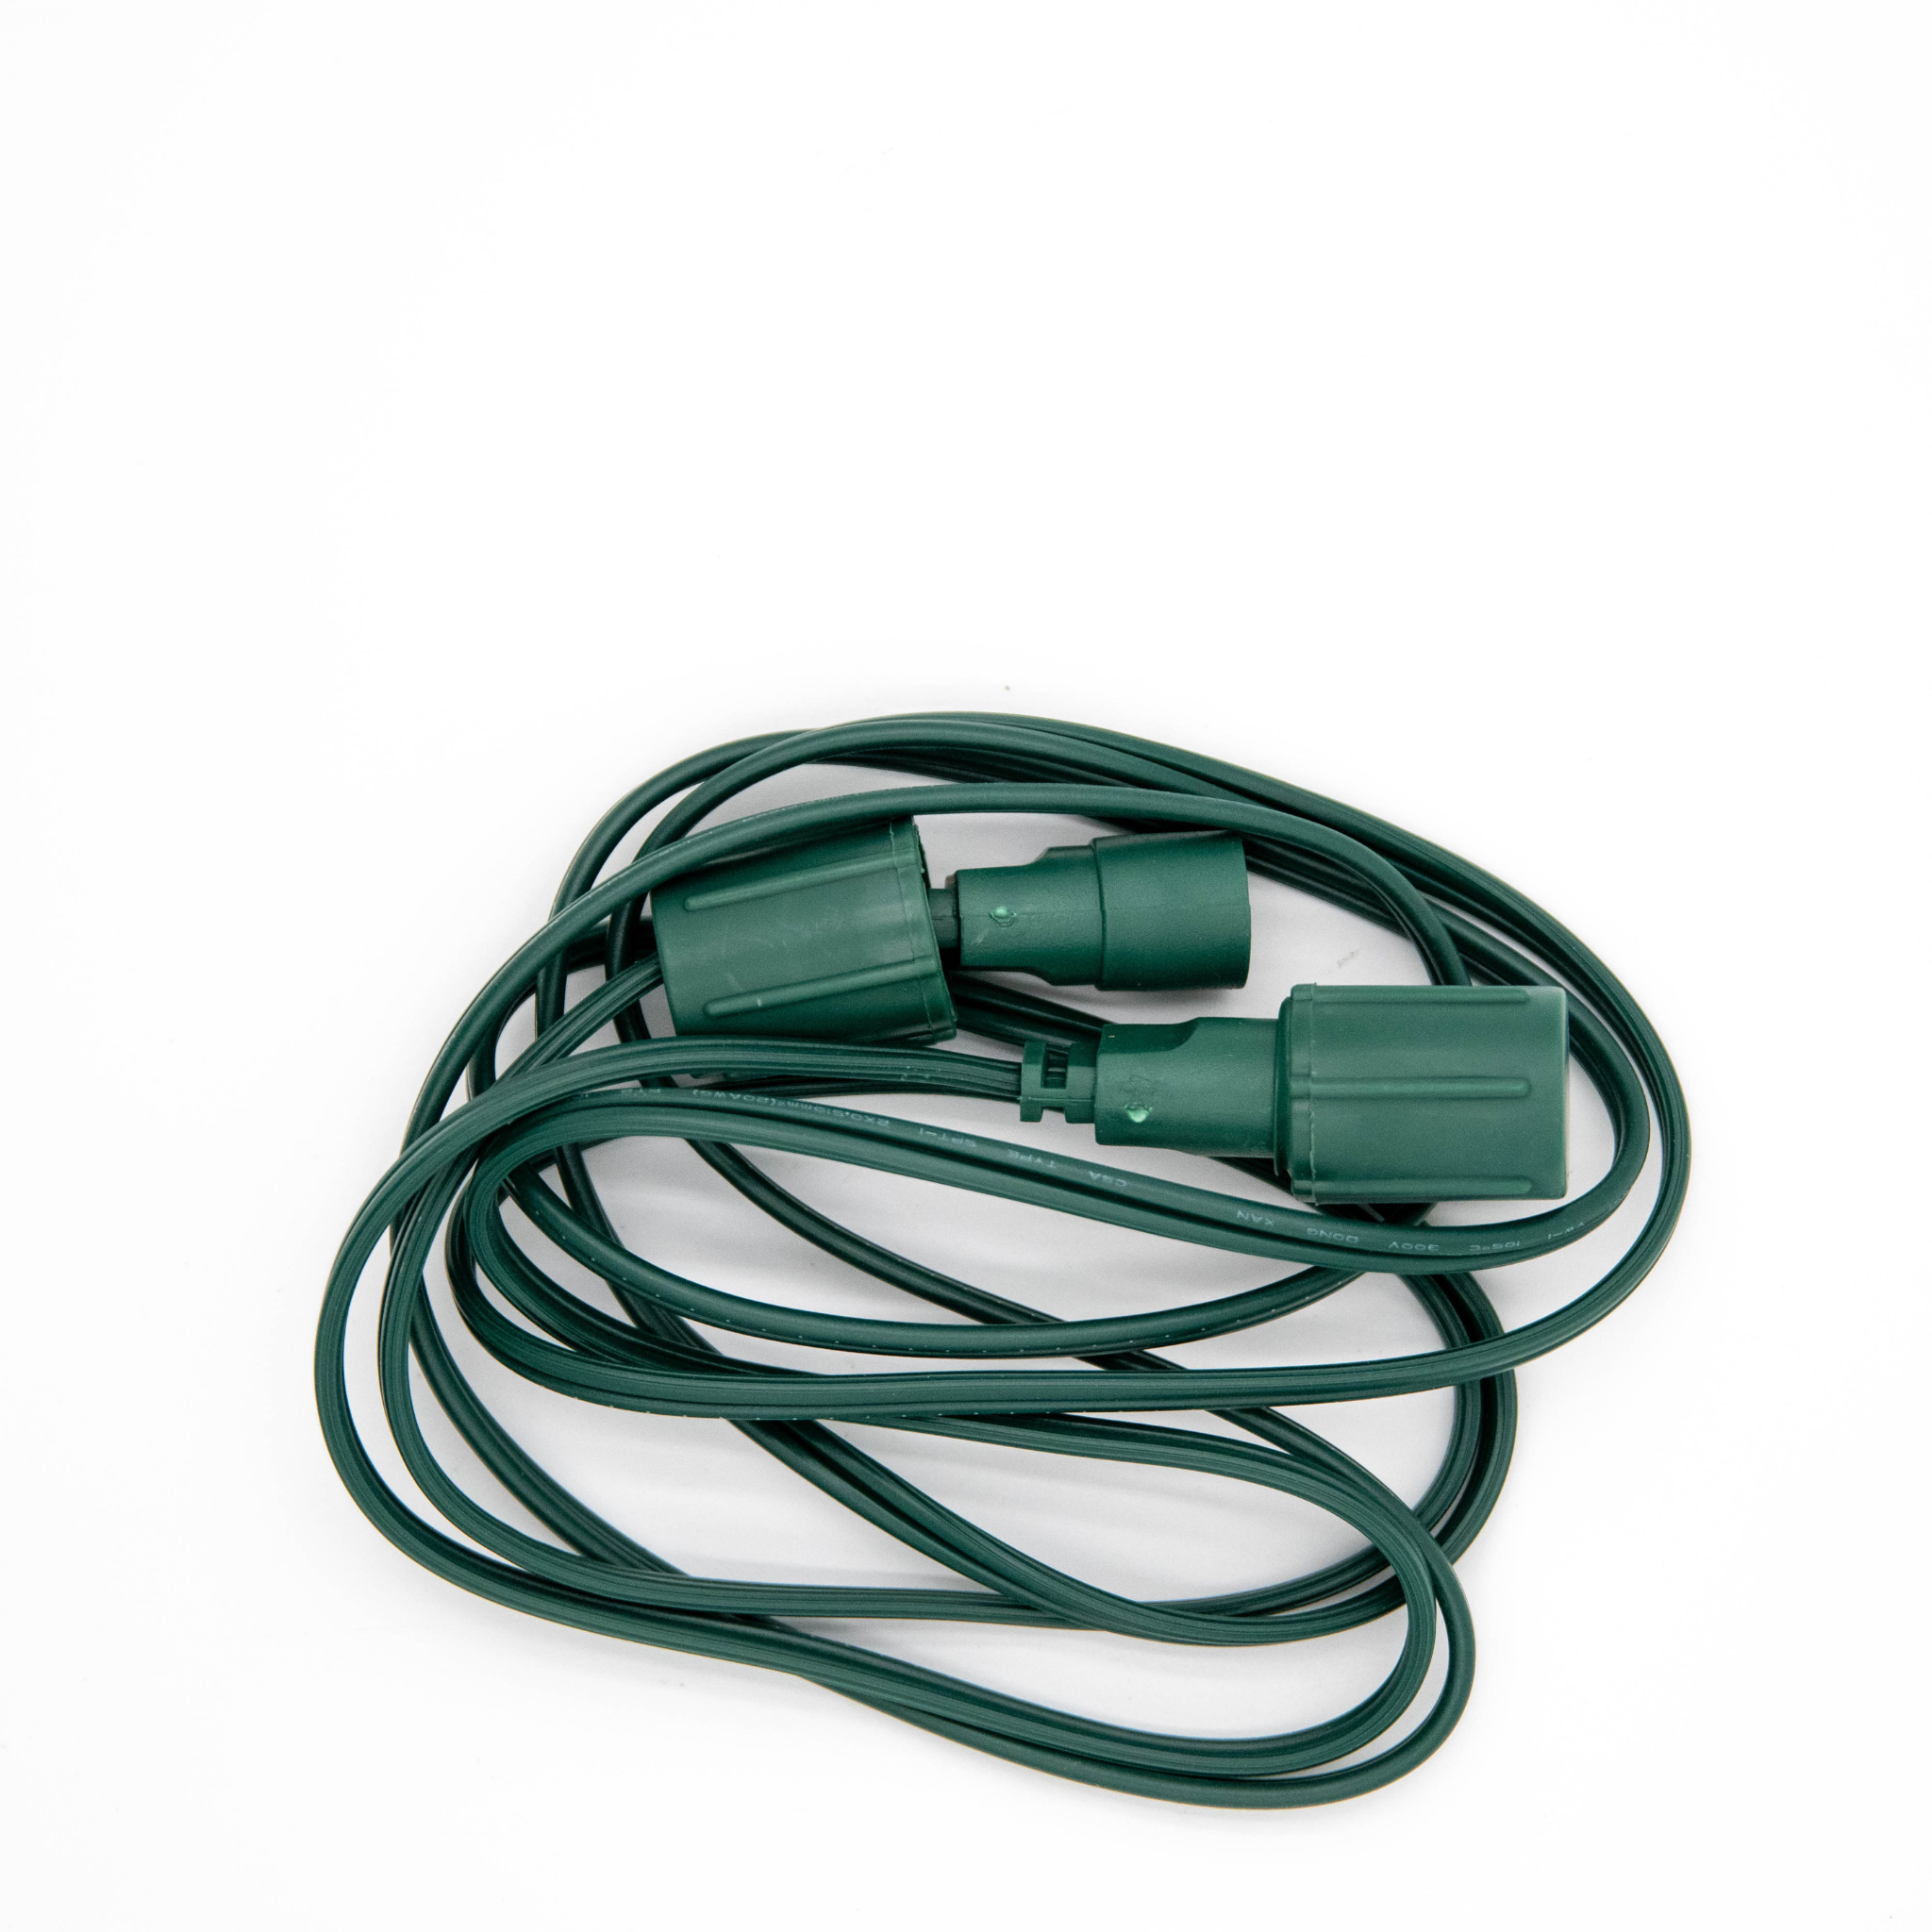 6 foot Coaxial Extension Cord